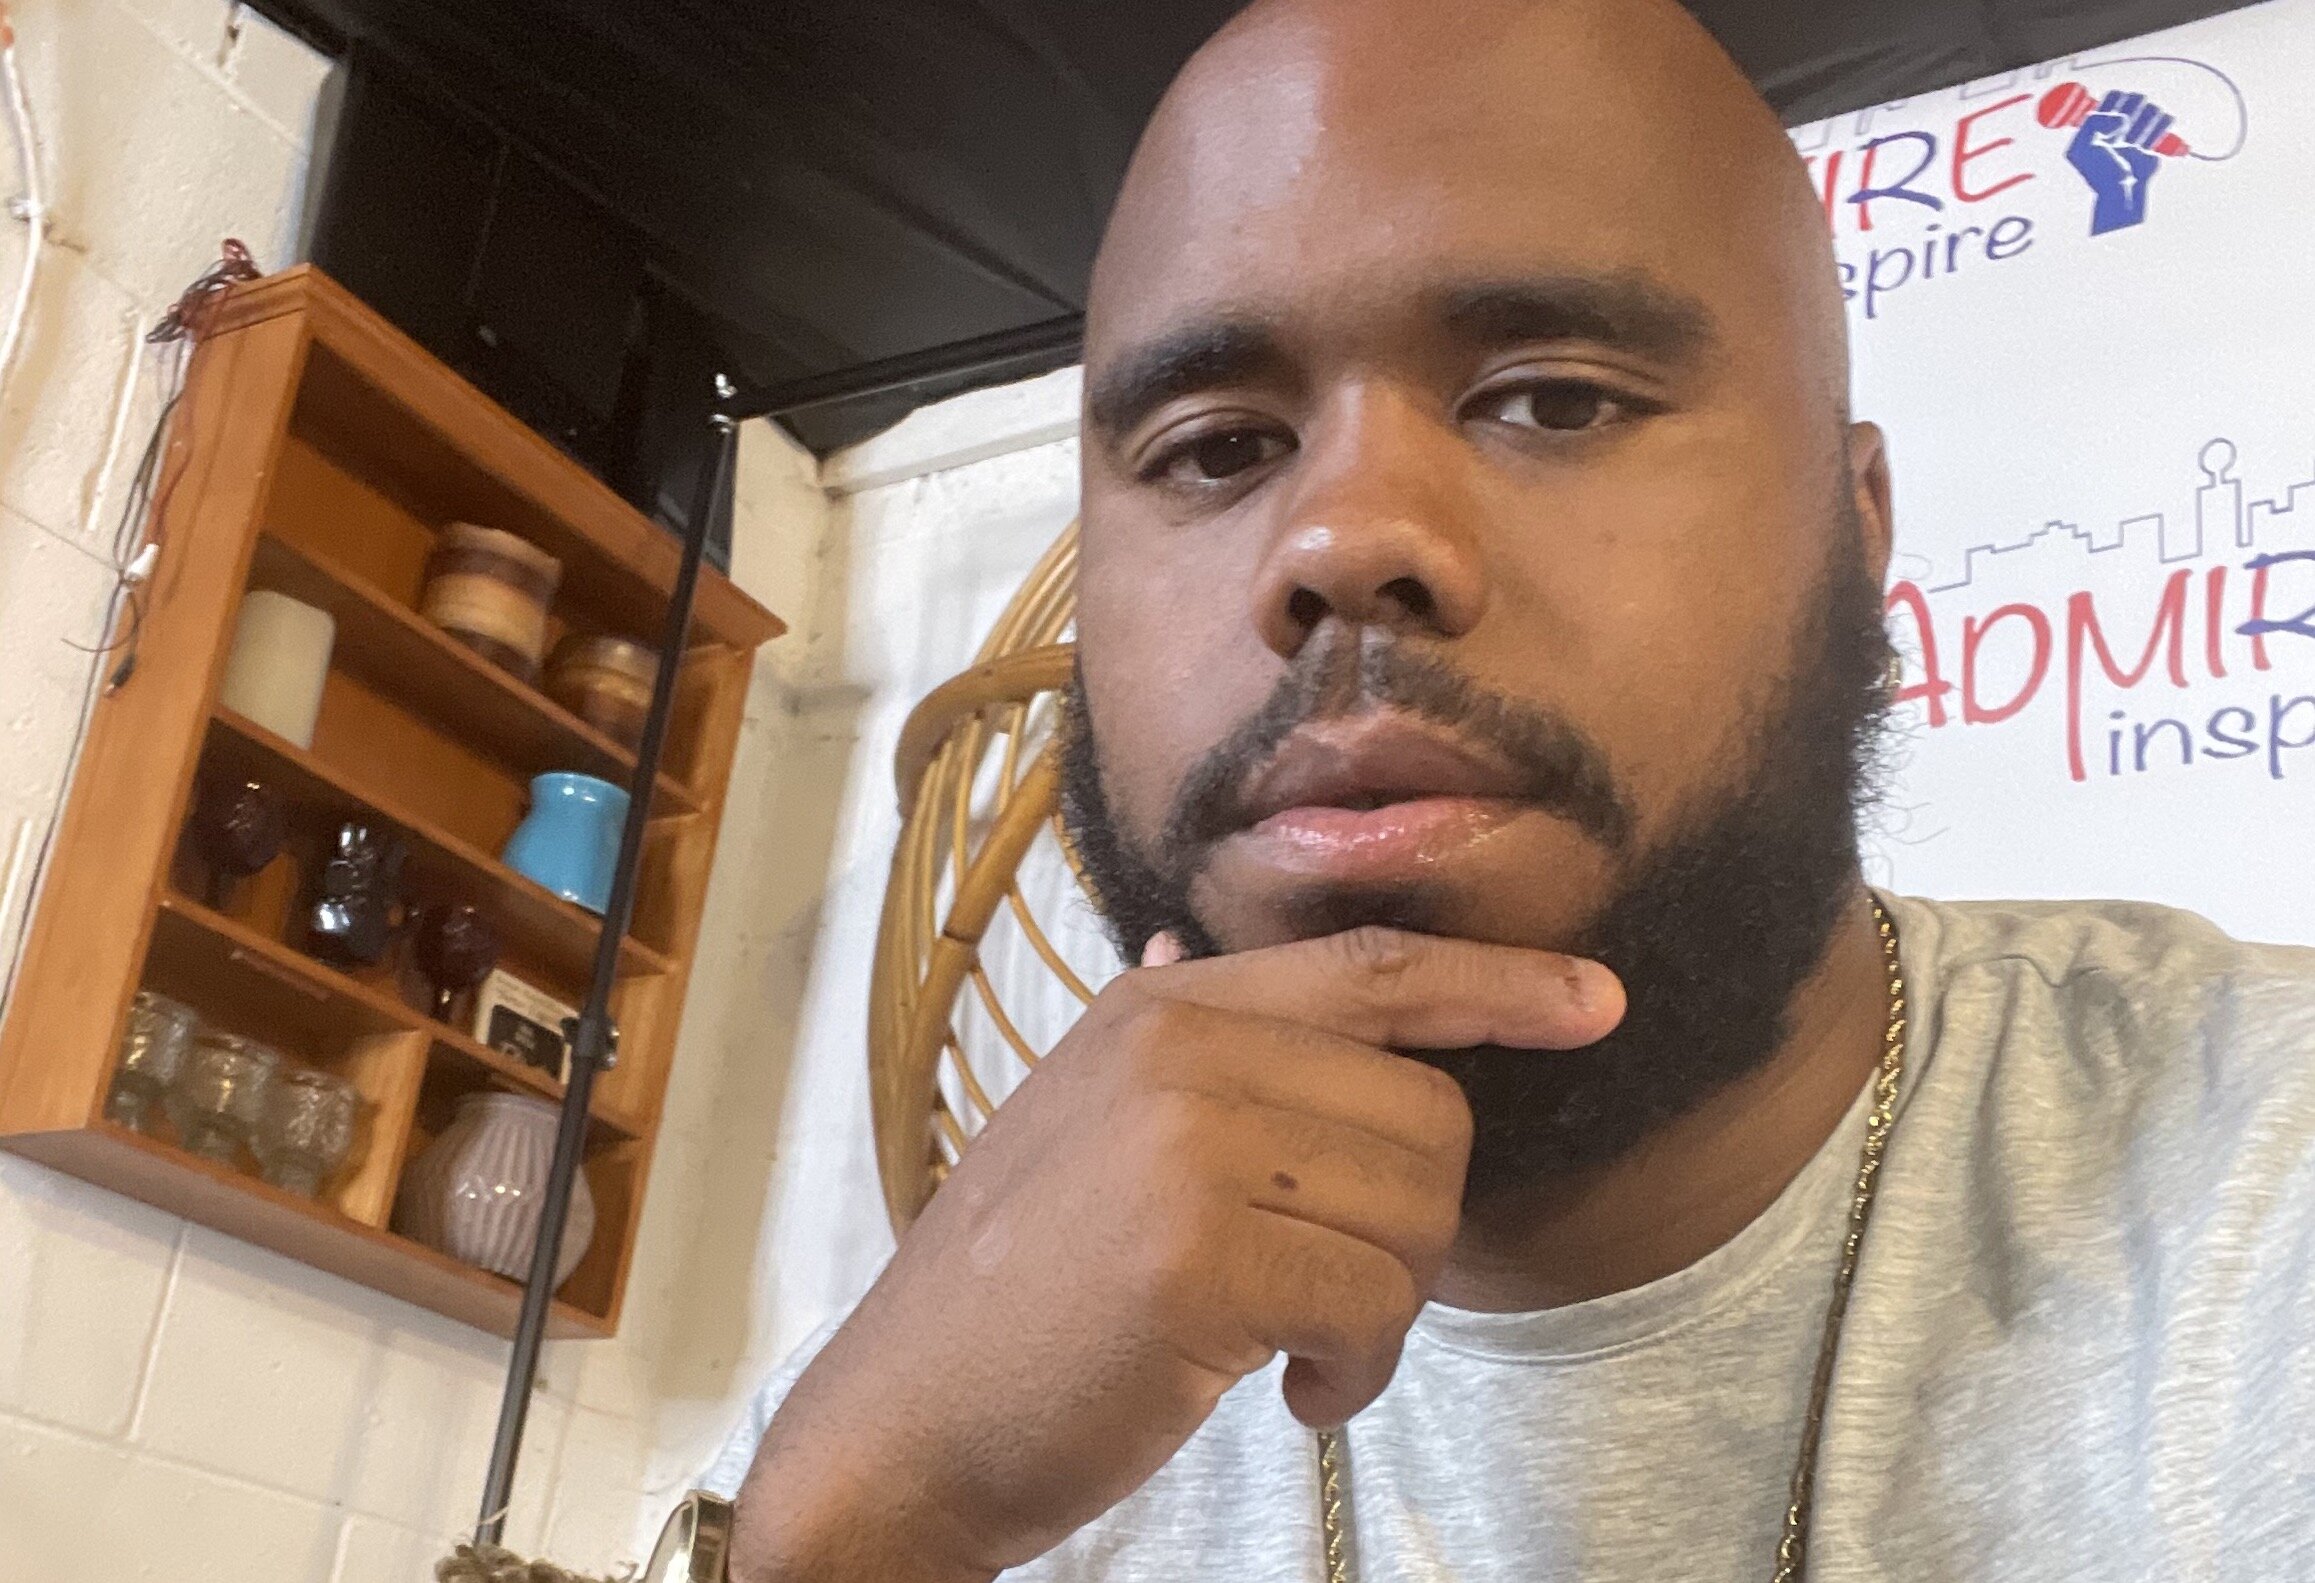 Flint native Rayvon Taylor launched his podcast in April and has since recored more than 40 episodes.